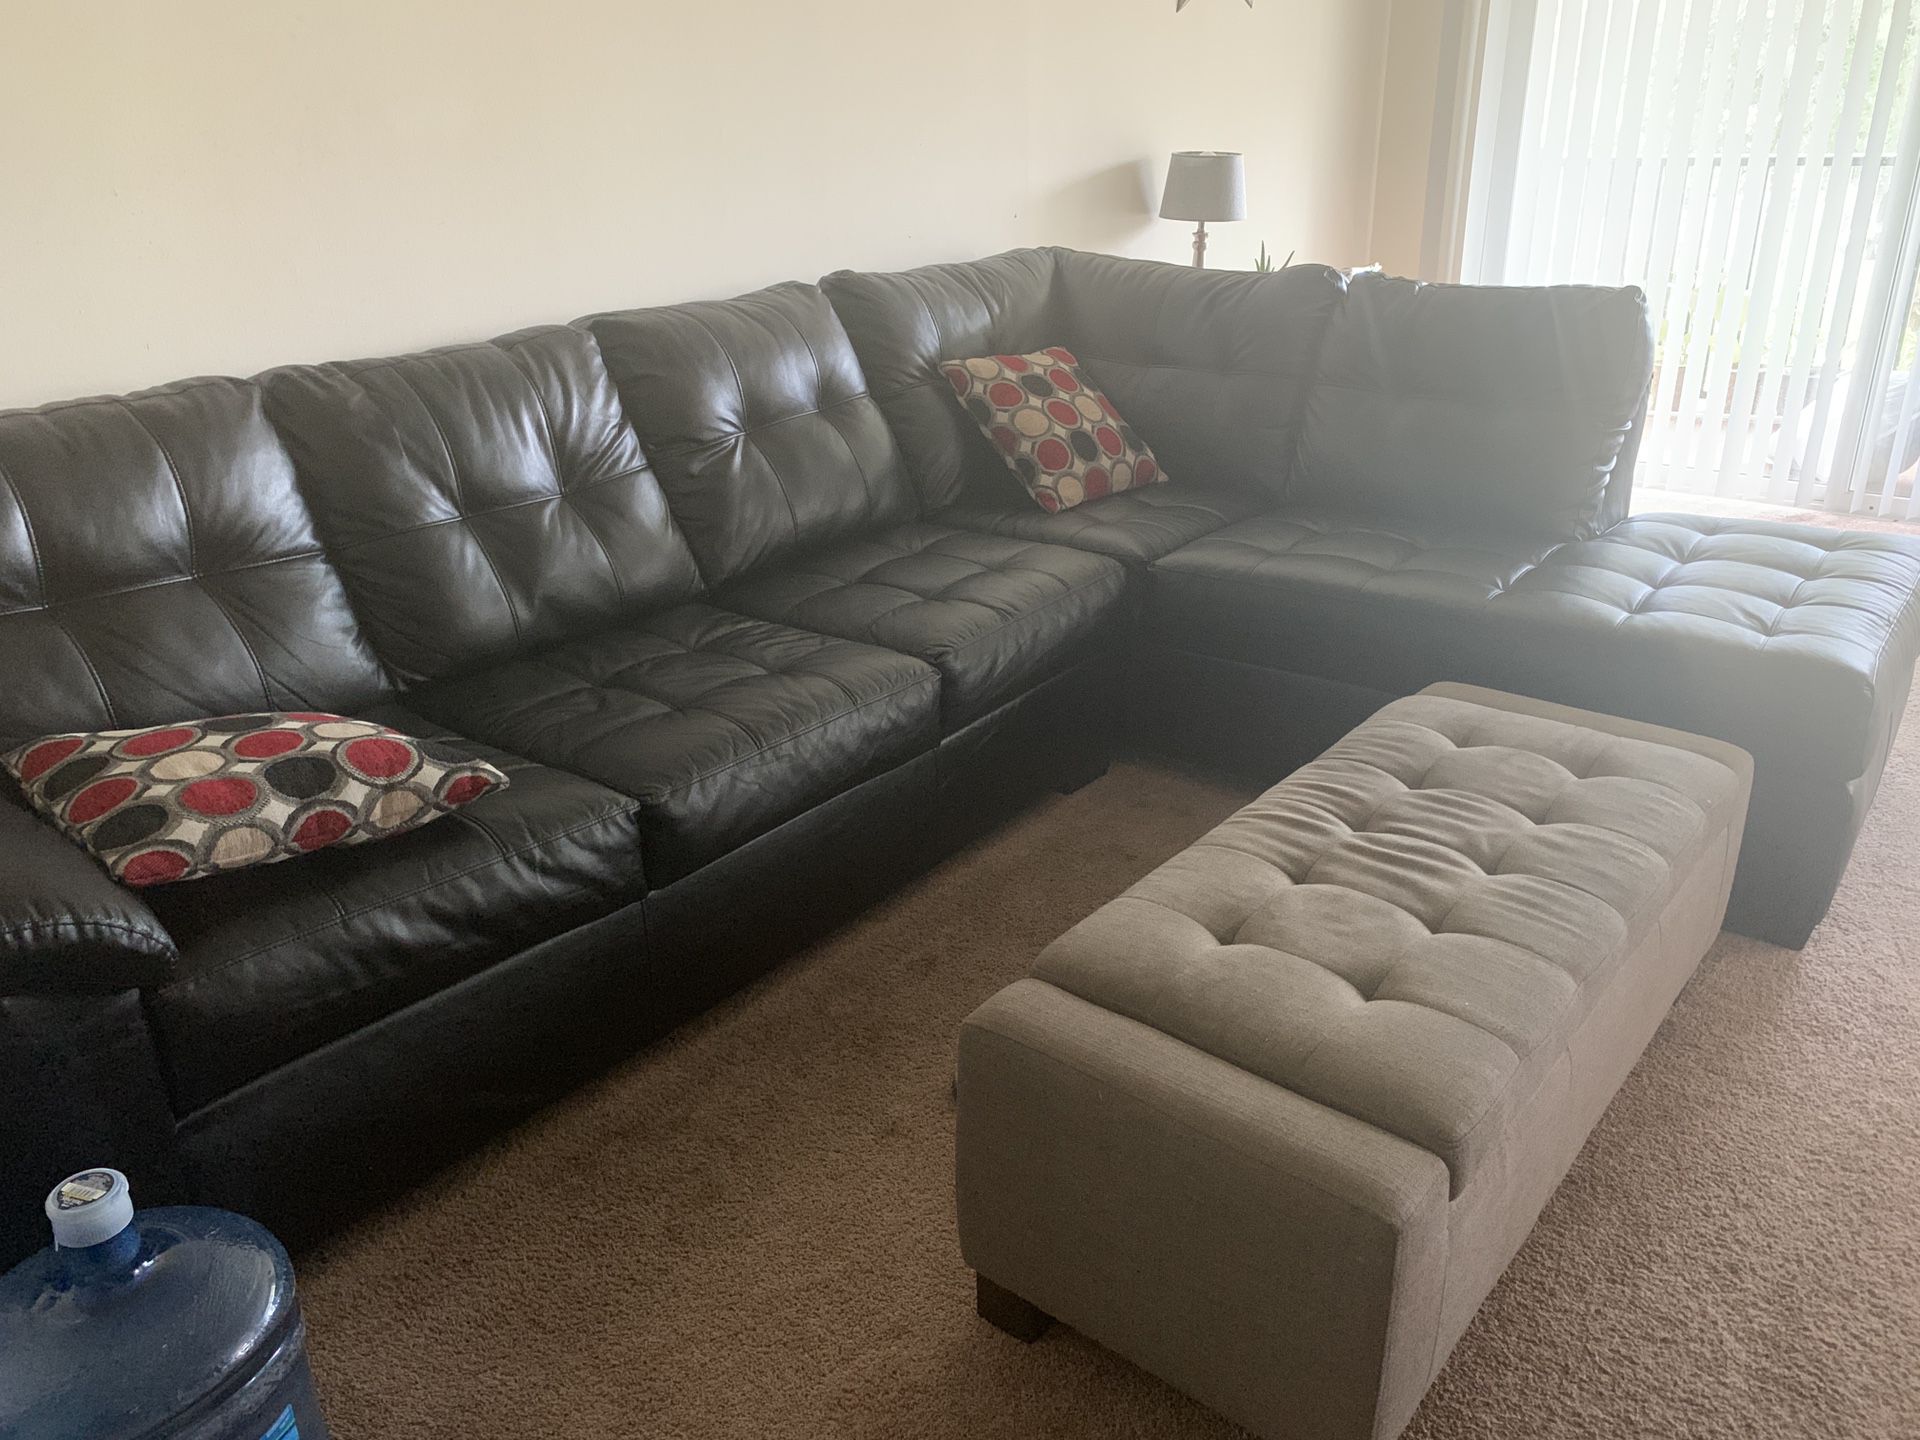 Leather couches